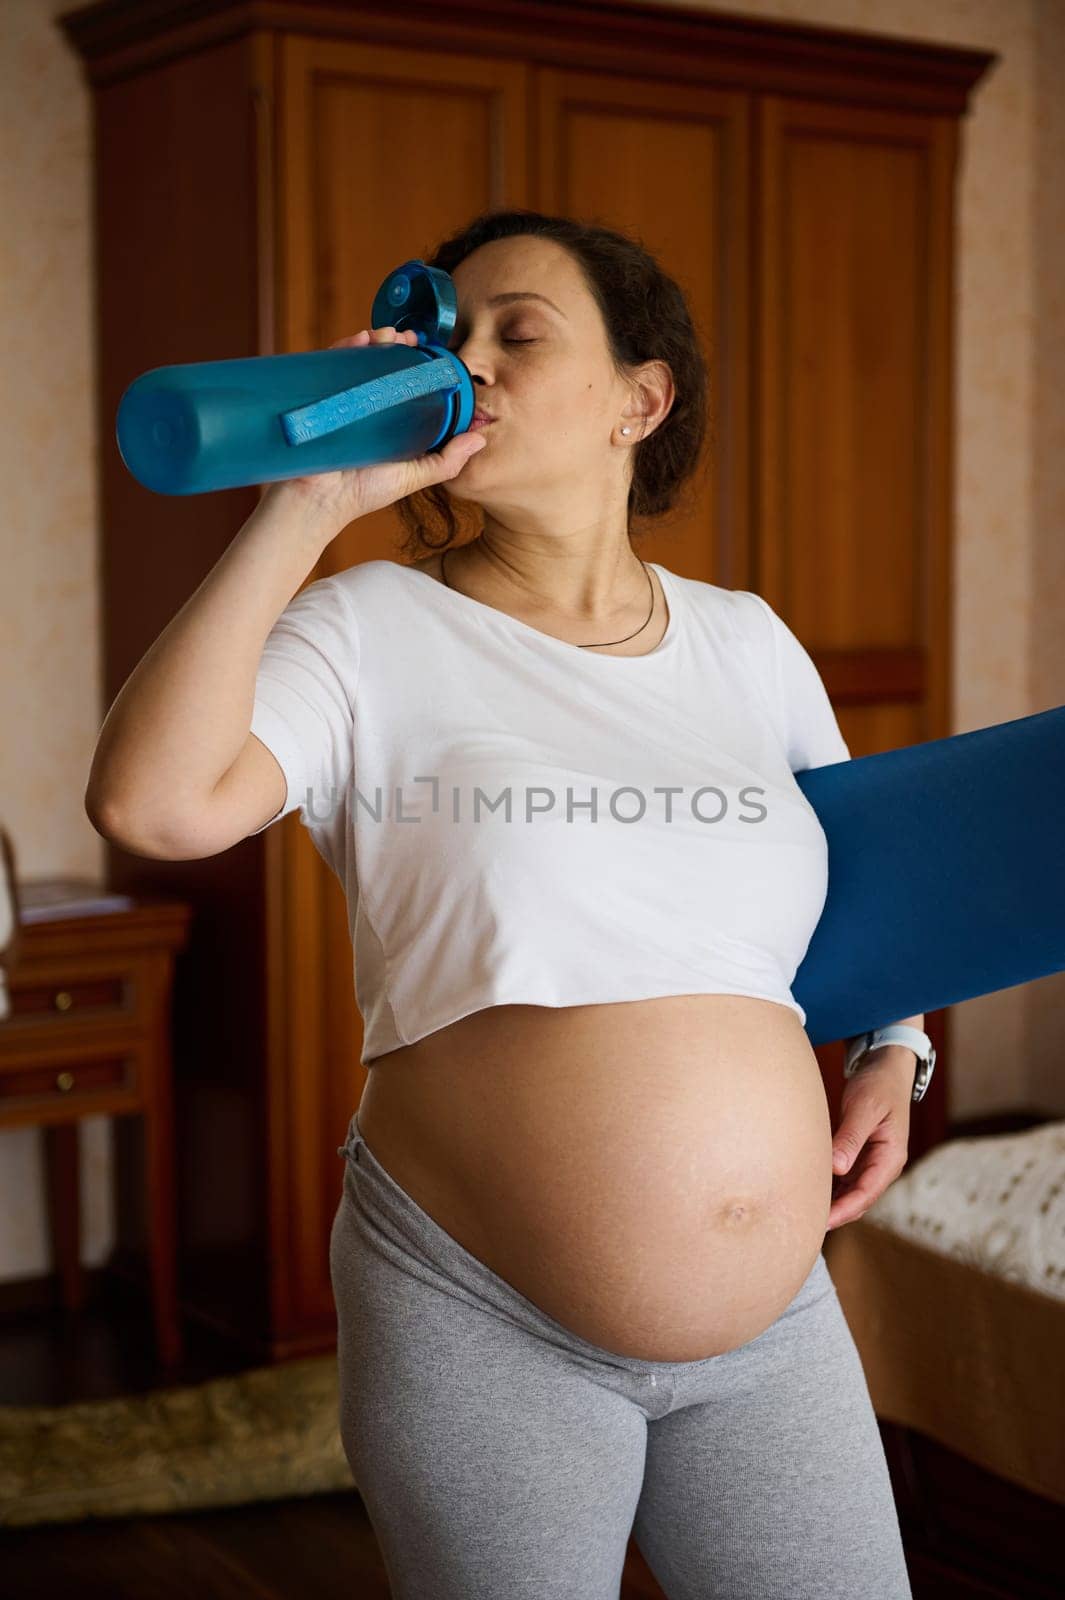 Pregnant sporty woman drinks water, renewing aqua balance after fitness workout, holding an exercise mat, standing at home interior, enjoying active healthy lifestyle in pregnancy and maternity leave